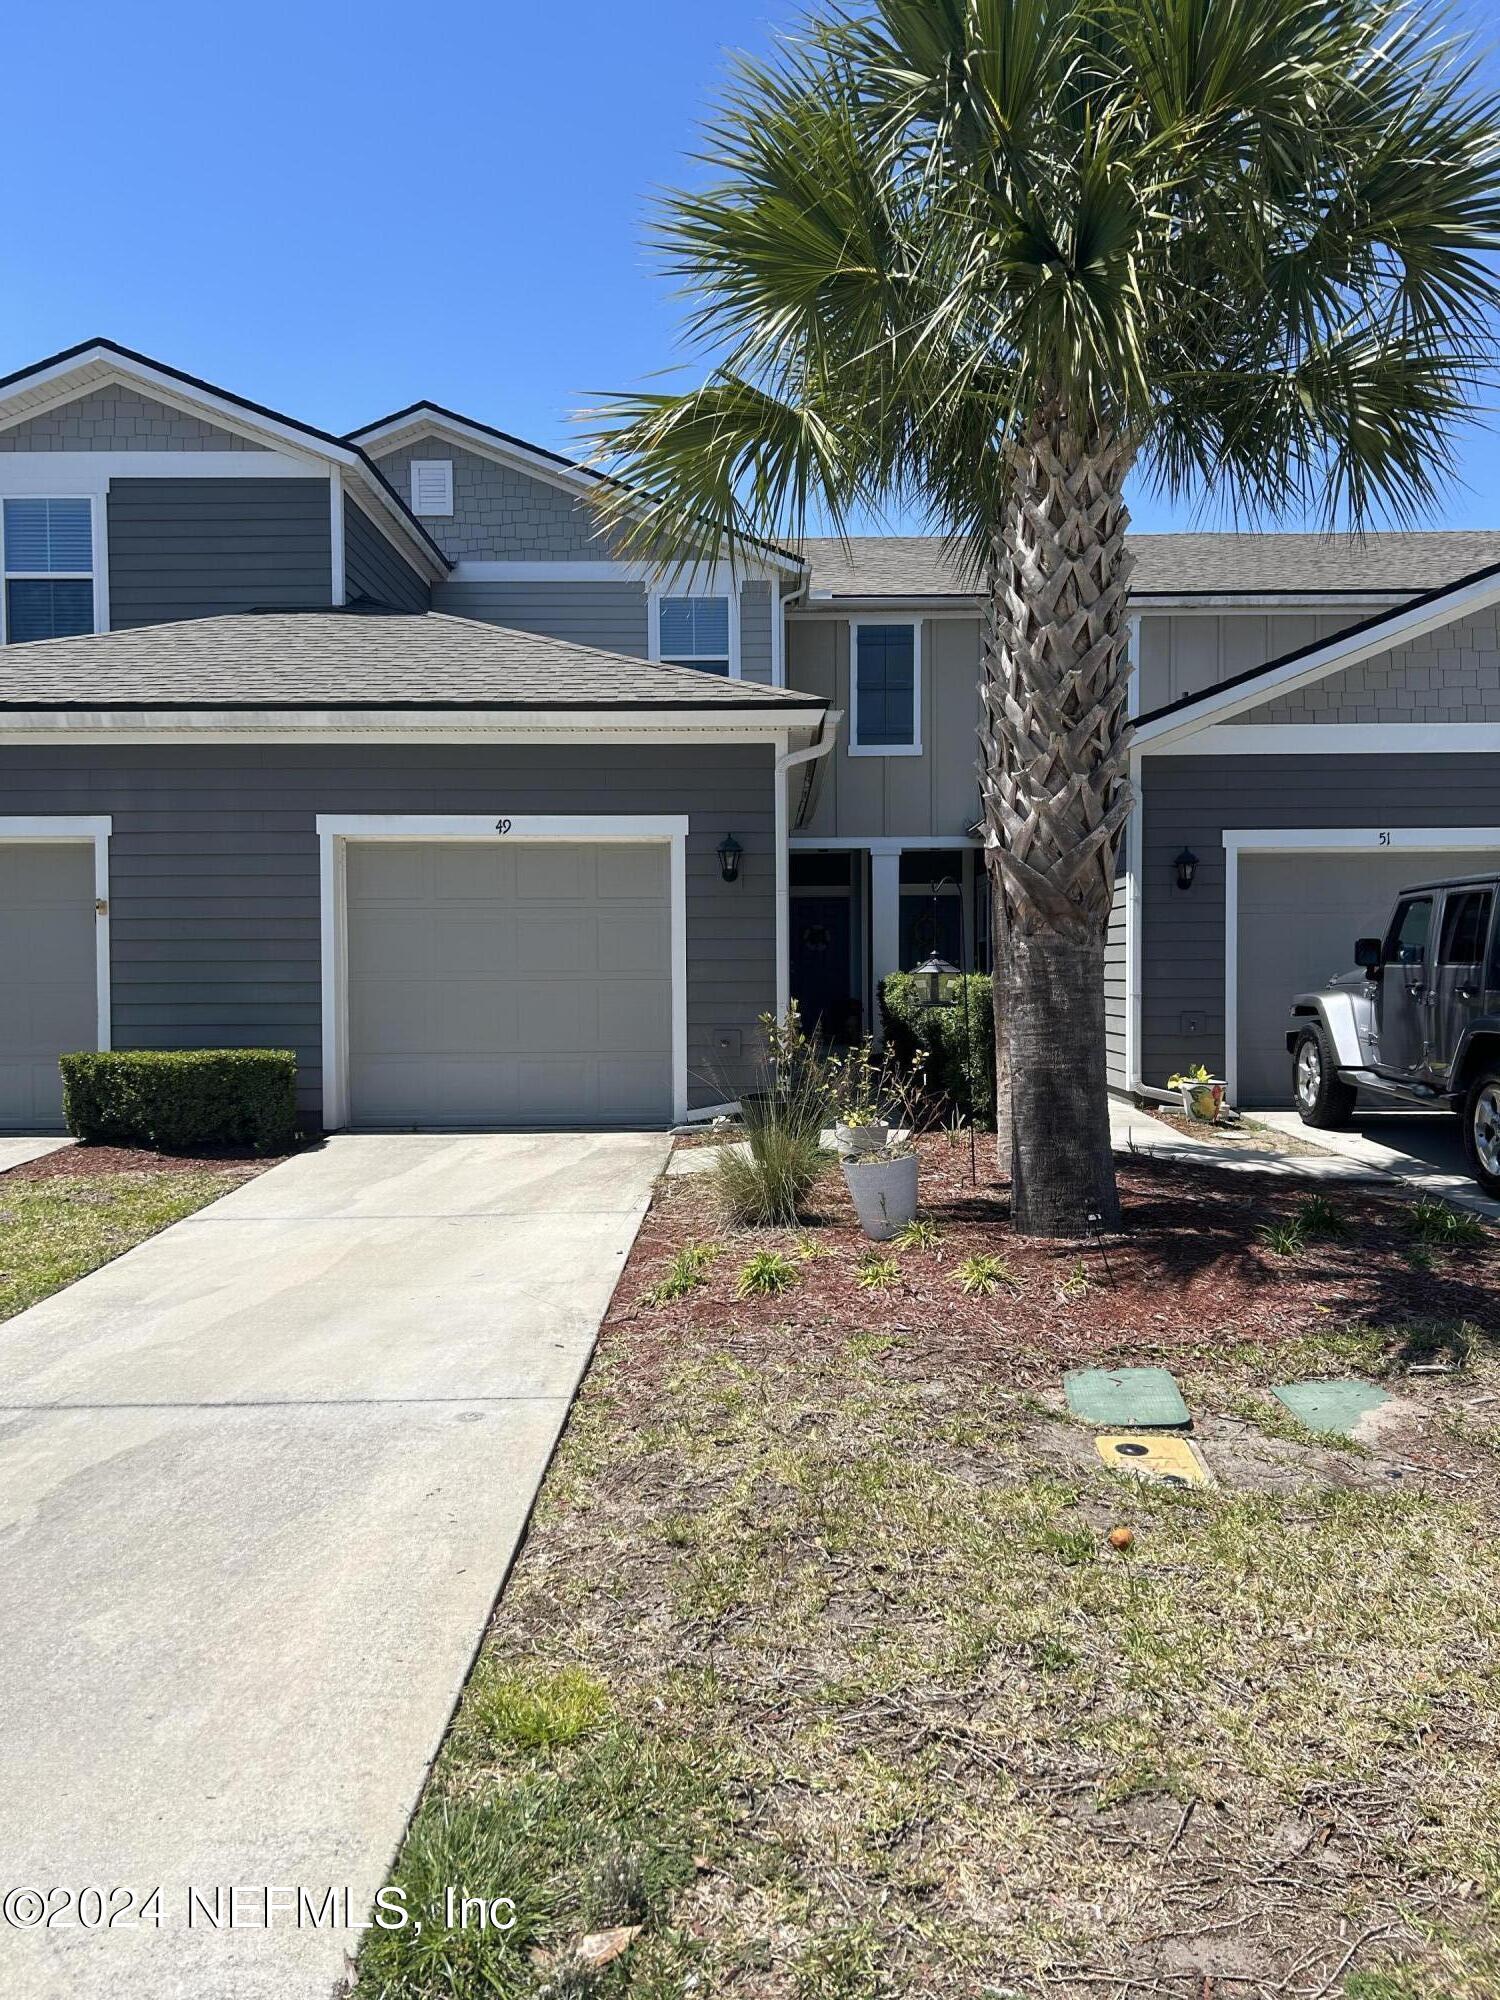 St Johns, FL home for sale located at 49 Englewood Trace, St Johns, FL 32259